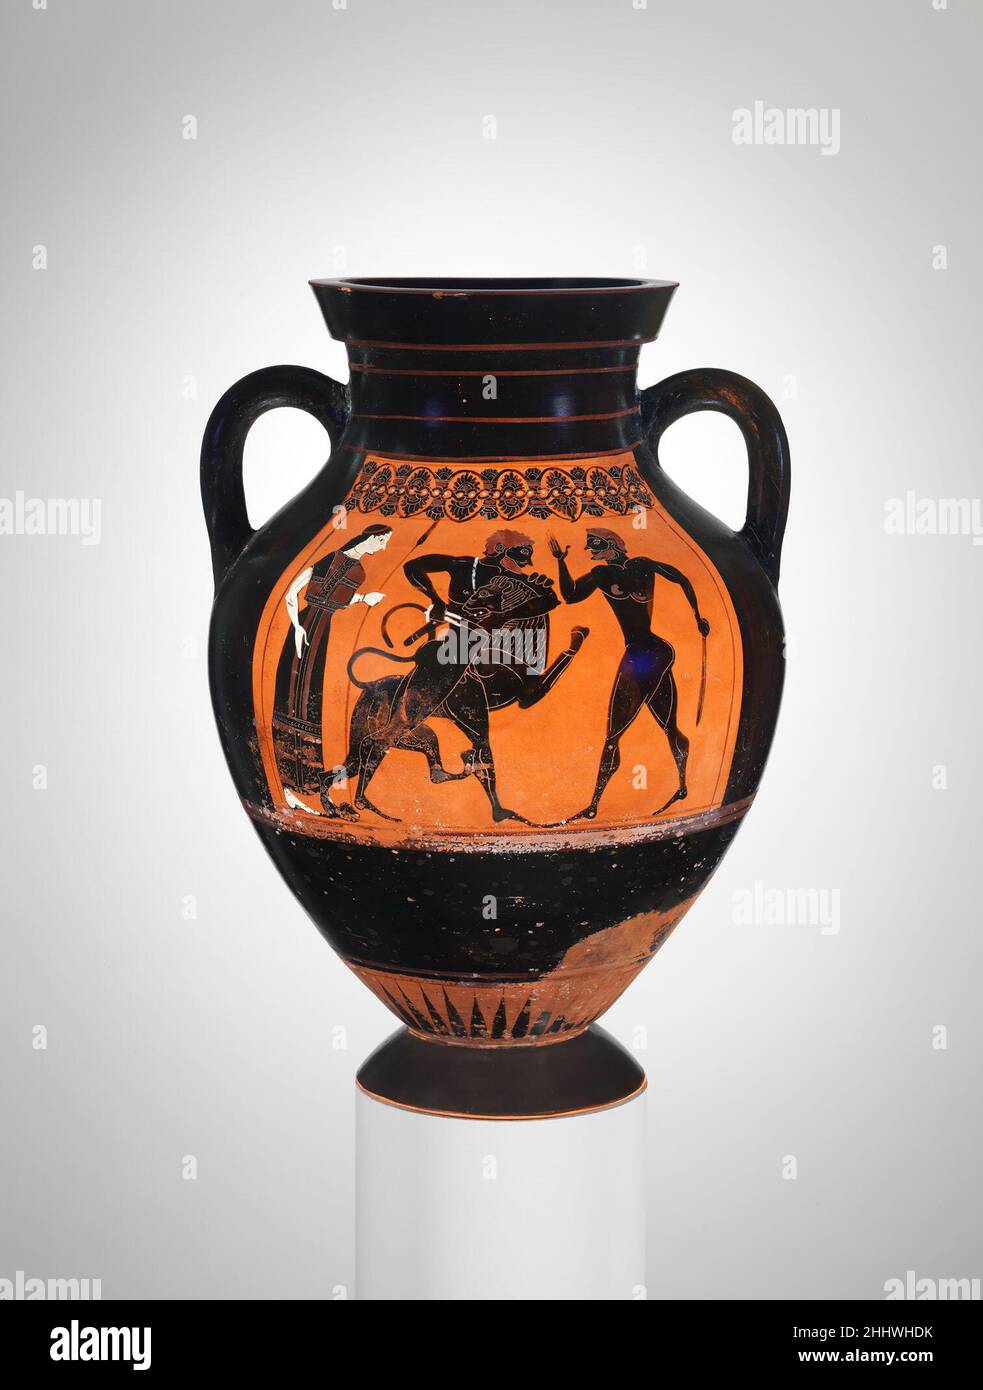 Terracotta amphora (jar) ca. 540 B.C. Attributed to a painter of Group E Obverse, Herakles wrestling the Nemean LionReverse, Herakles fighting GeryonGroup E is the name given to a workshop of painters active during the middle of the sixth century B.C. Exekias, the greatest black-figure artist, began among them. Geryon was a three-bodied creature who lived far to the west with his dog and herd of cattle. One of Herakles' labors was to kill Geryon and bring back the cattle.. Terracotta amphora (jar)  254869 : Attributed to a painter of Group E, Terracotta amphora (jar), ca. 540 B.C., Terracotta, Stock Photo